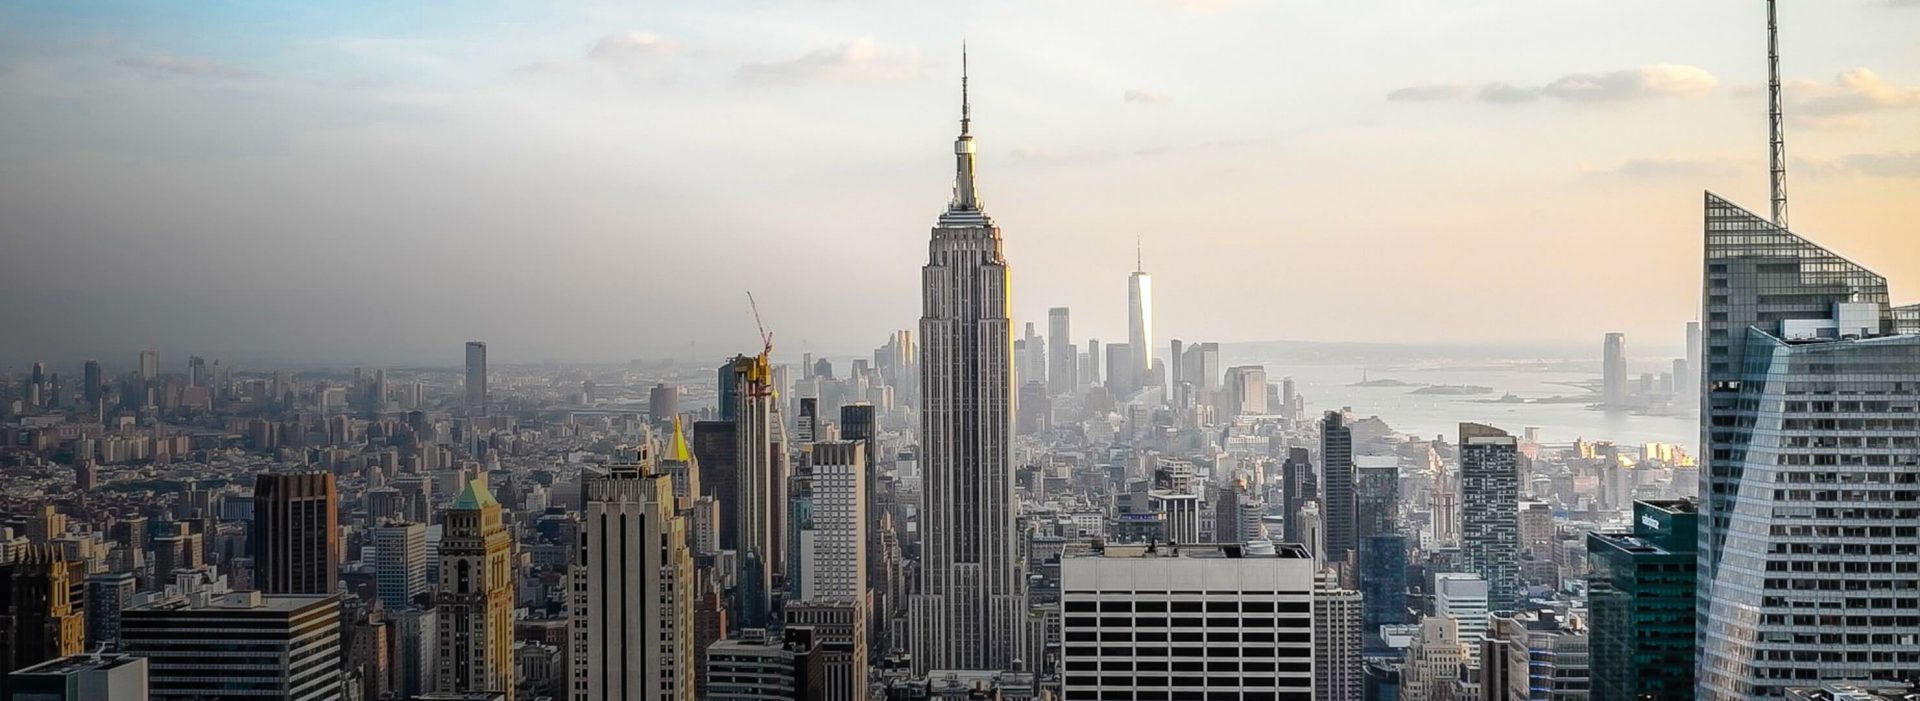 The Empire State Building, an architectural icon in DZ BANK’s US-American homebase, New York City